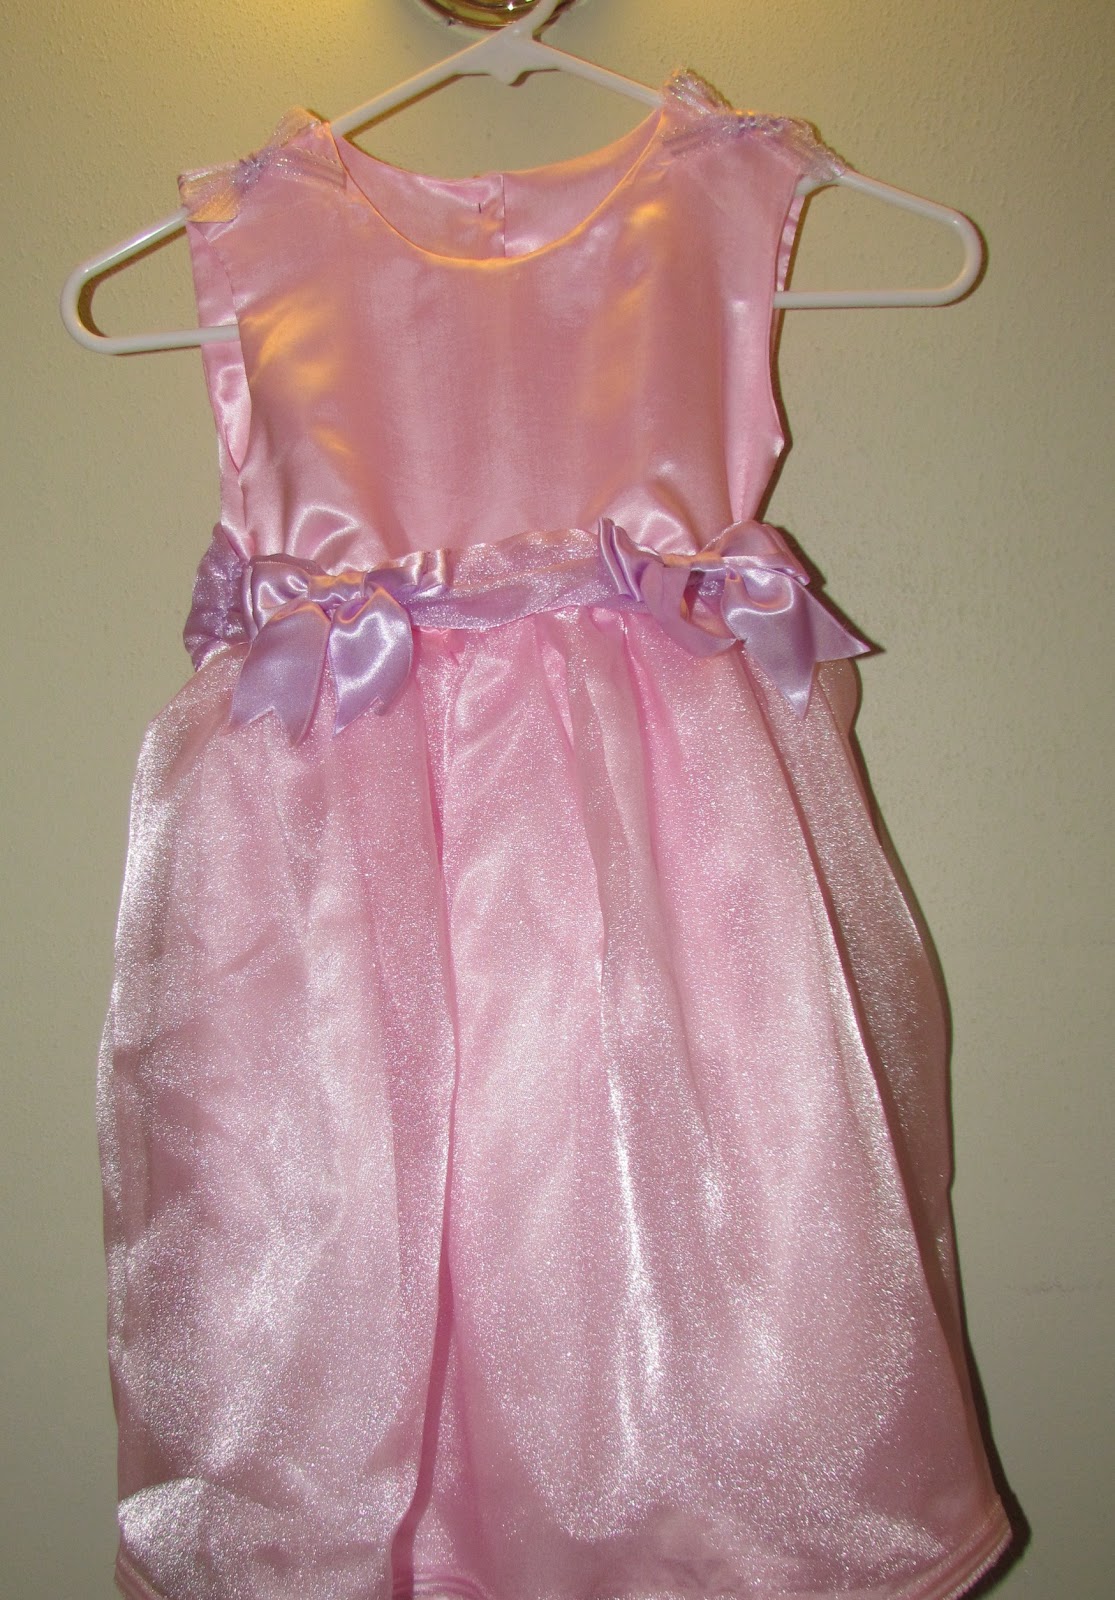 Mom's little place: Easter dress for Emma our little princess/Diva